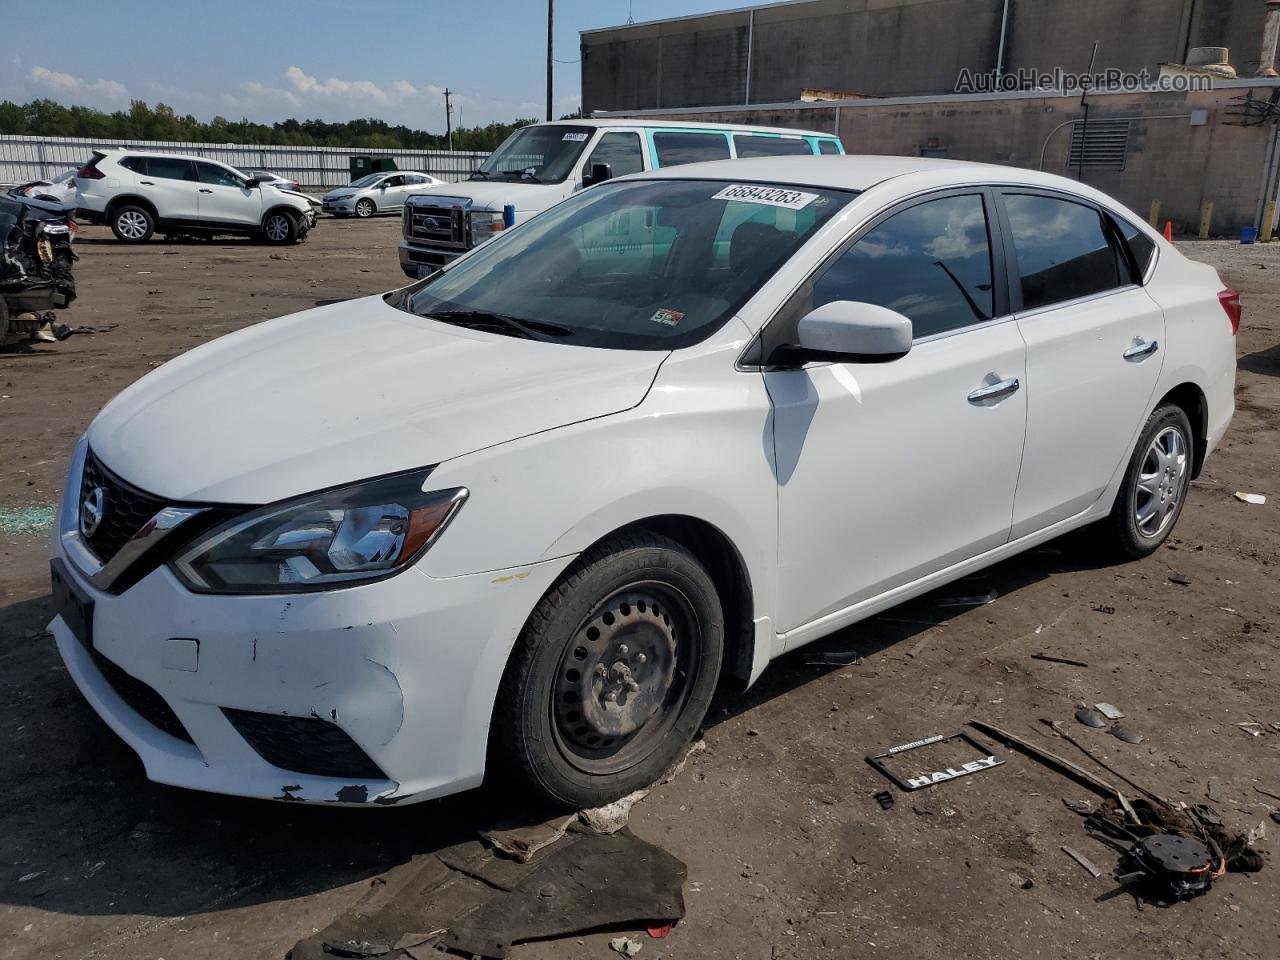 2016 Nissan Sentra S White vin: 3N1AB7APXGY234555